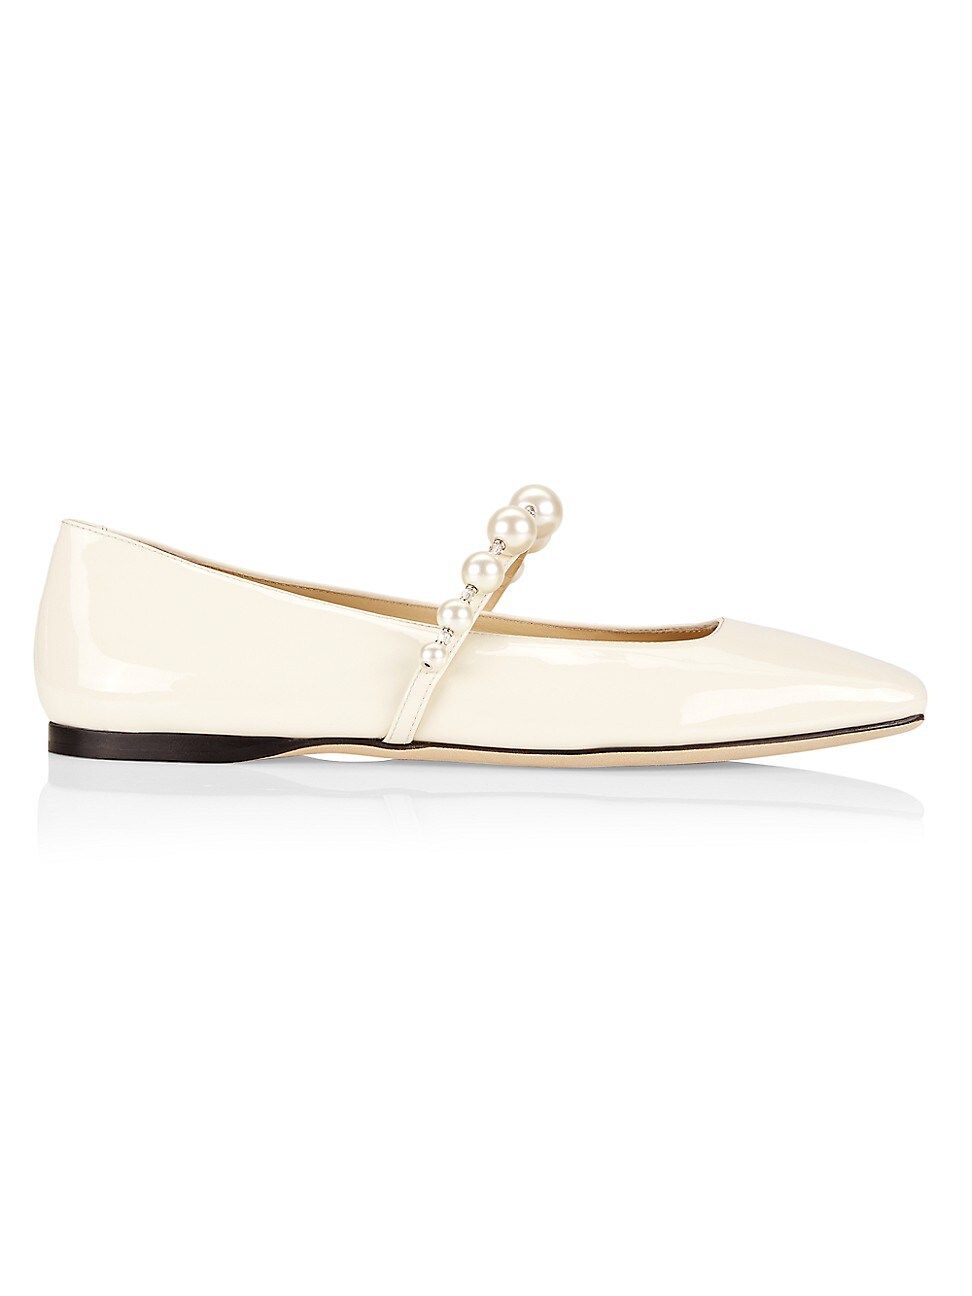 Ade Patent Leather Mary Janes | Saks Fifth Avenue